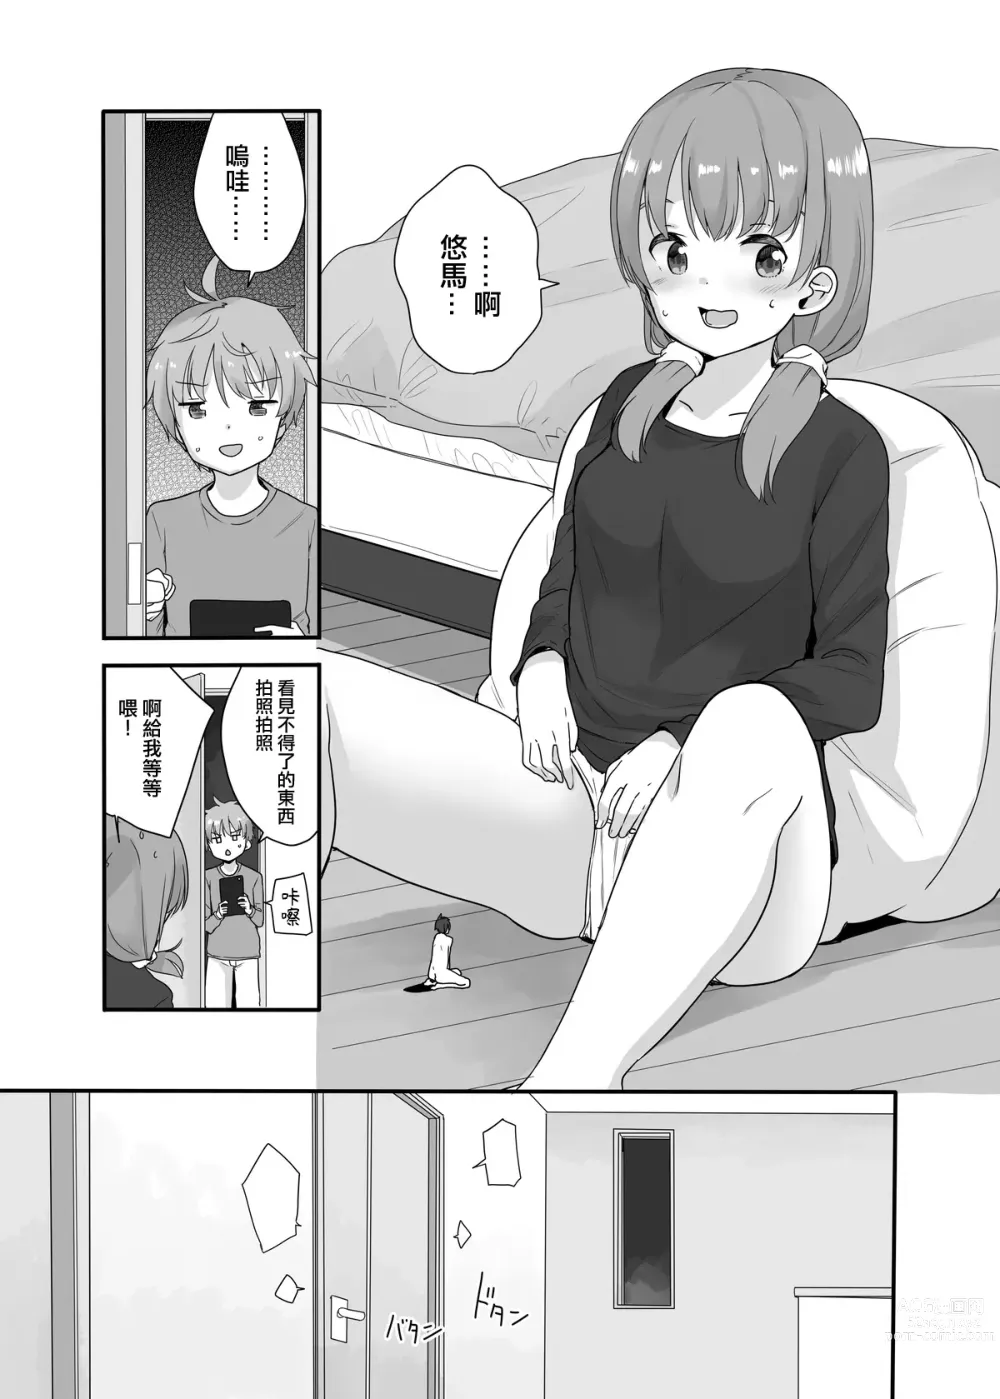 Page 5 of doujinshi Little Sister With Grande Everyday 3